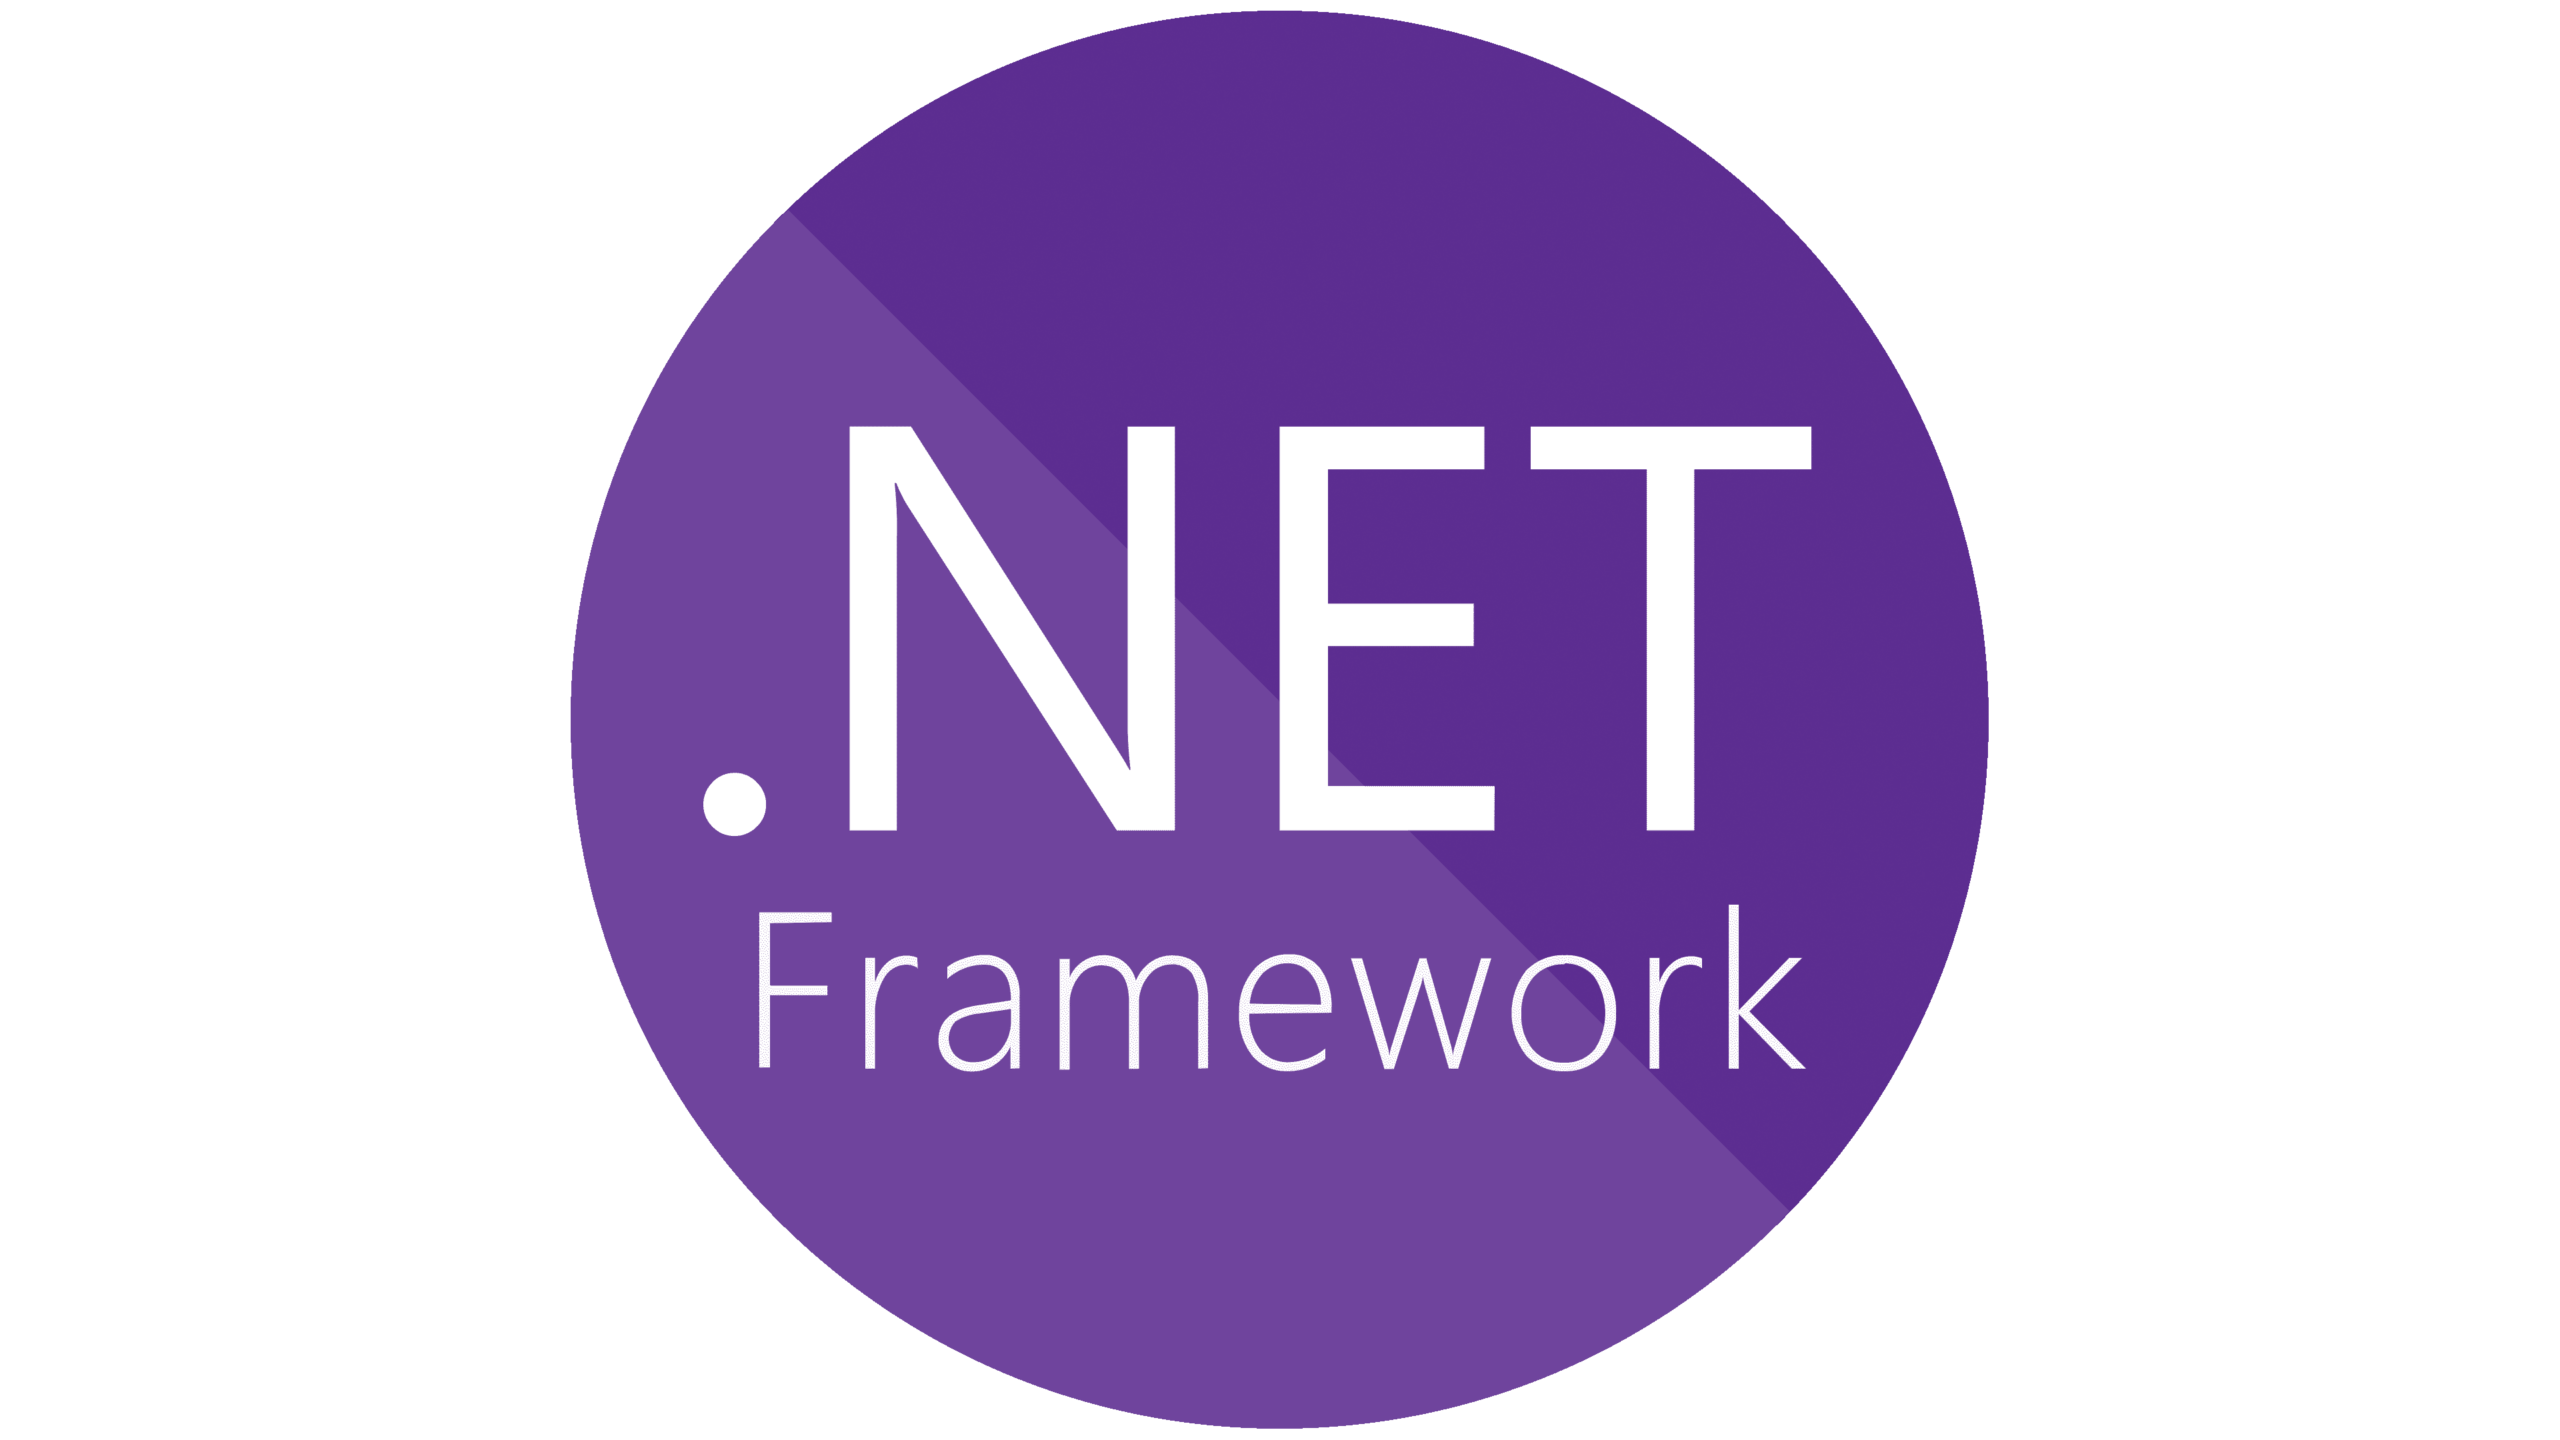 10 Things to Know About the .NET Framework